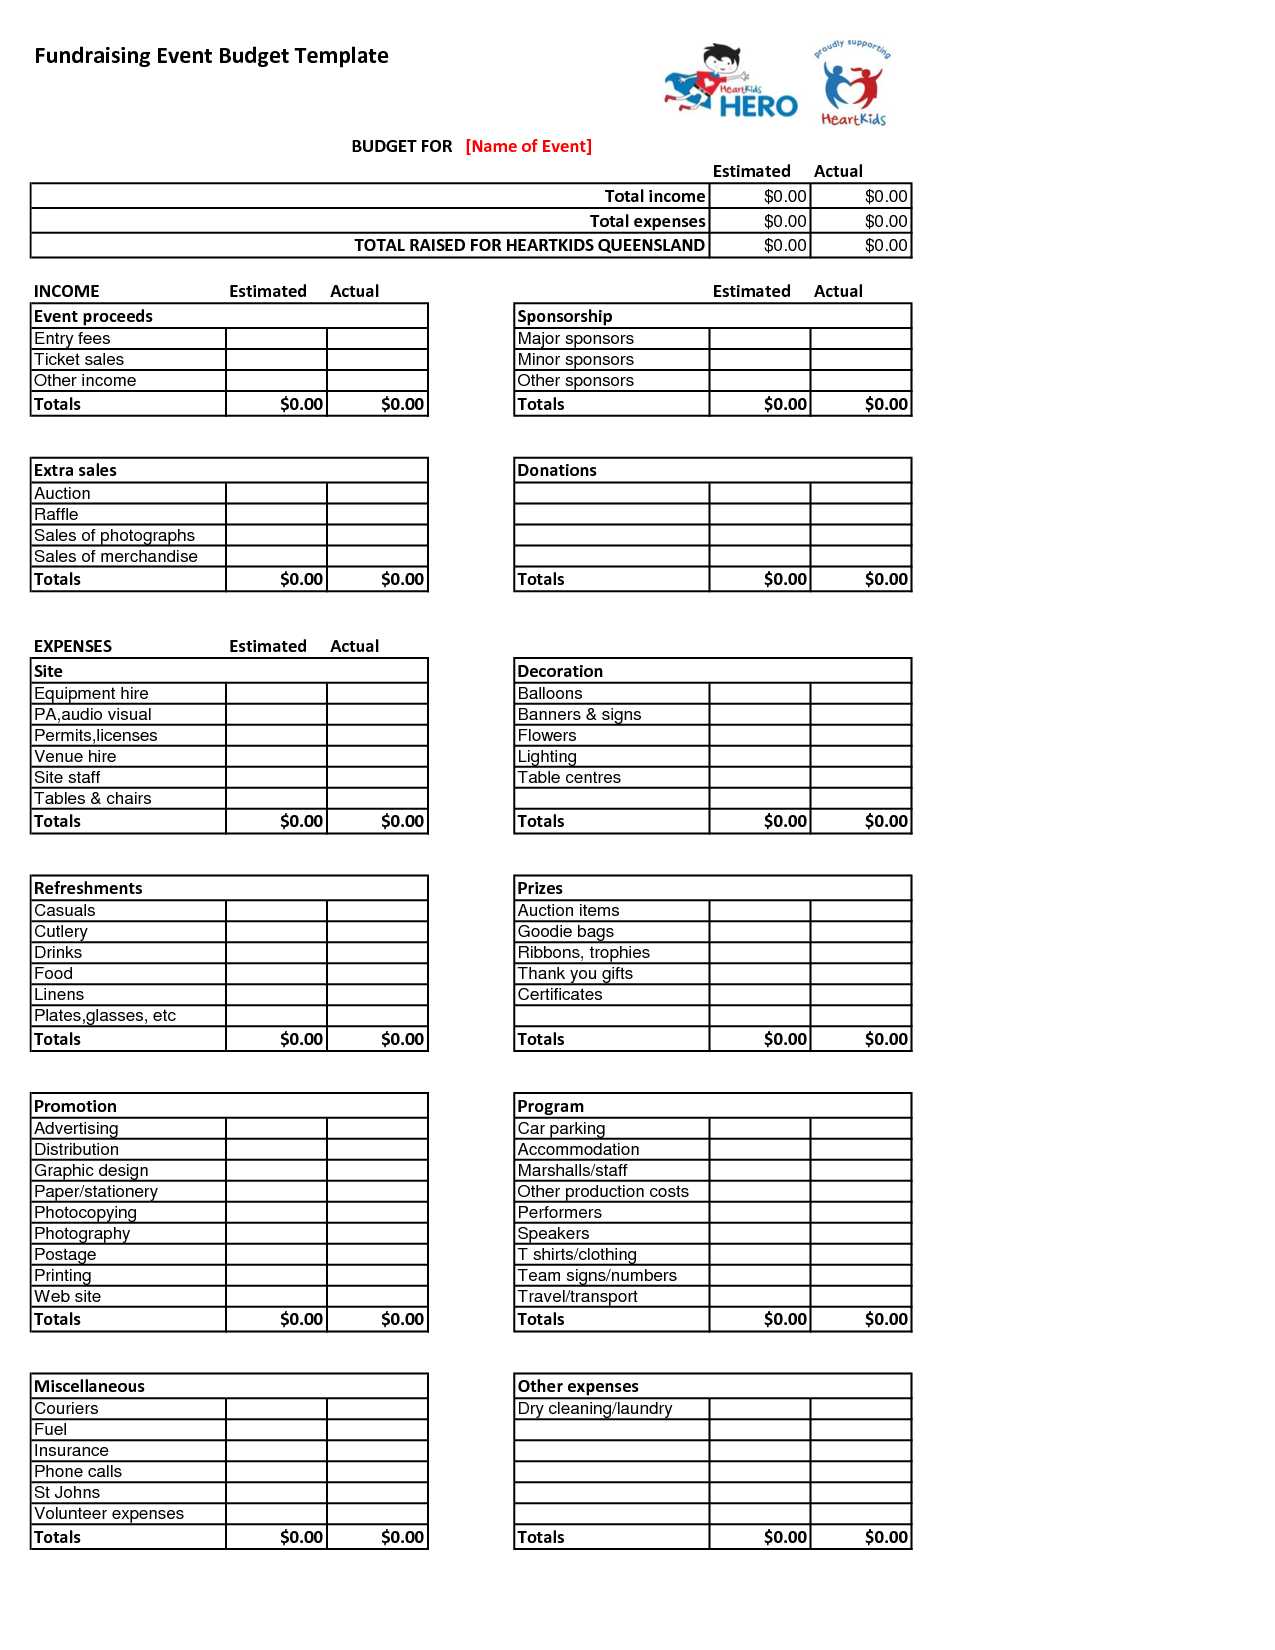 Expense Worksheet Excel or Sample Bud Spreadsheet Download the Personal Bud Spreadsheet